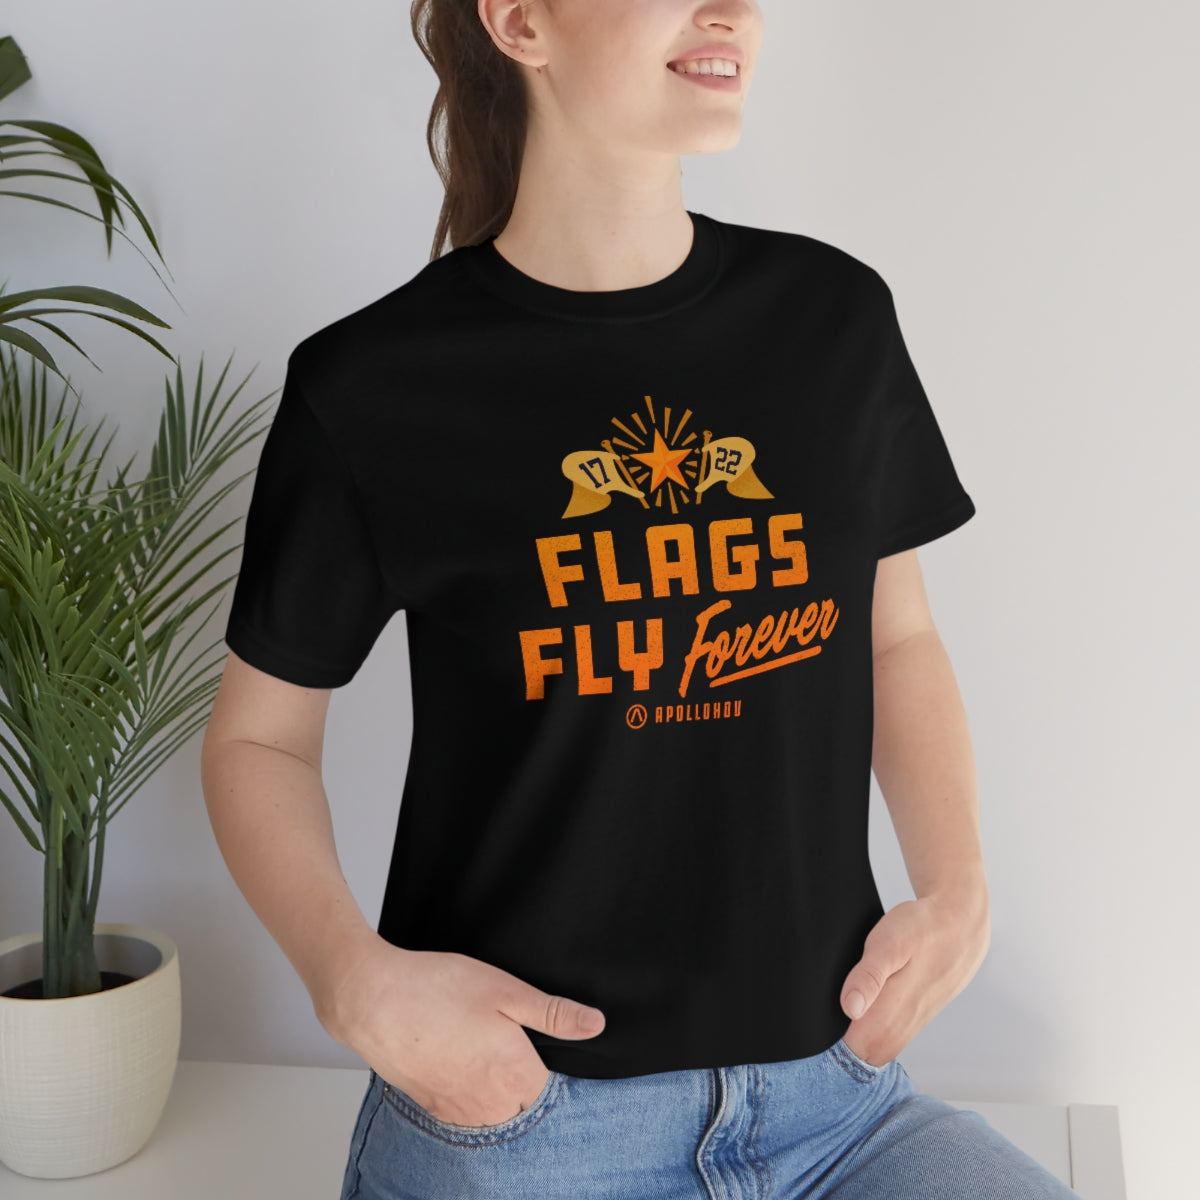 Flags Fly Forever 2022 Unisex Jersey Tee